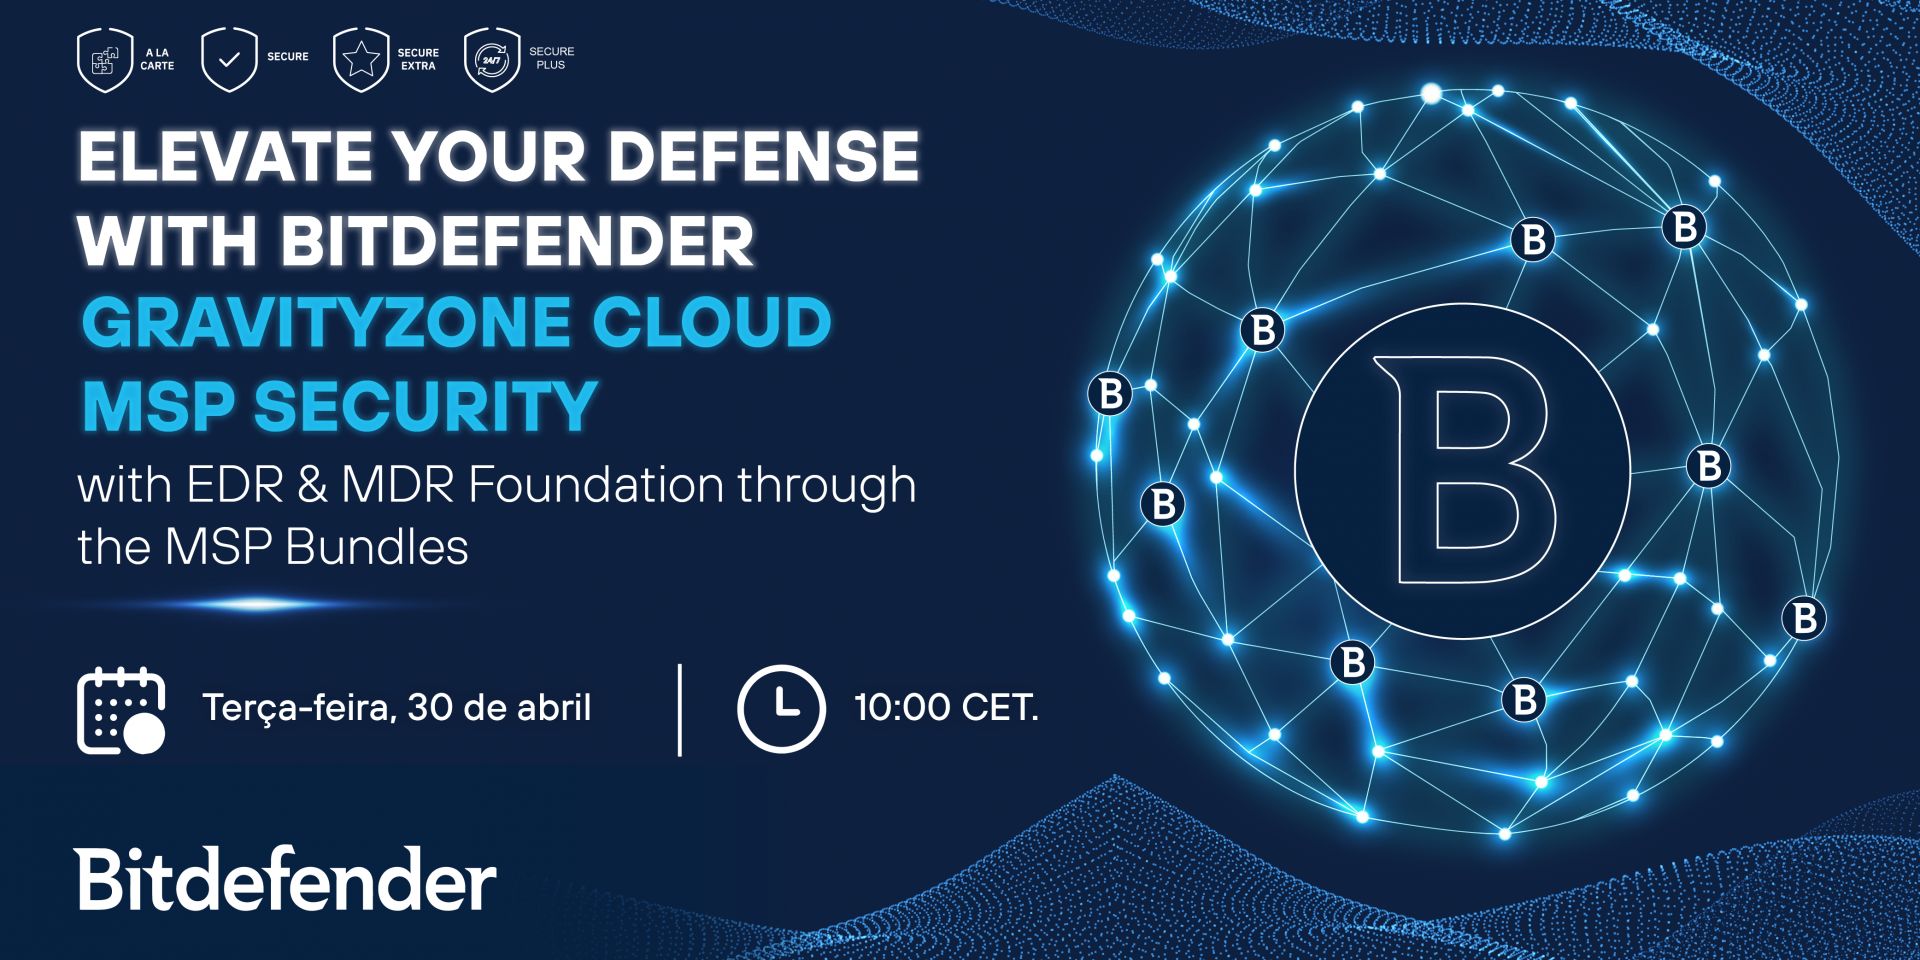 ELEVATE YOUR DEFENSE WITH BITDEFENDER GRAVITYZONE CLOUD MSP SECURITY WITH EDR & MDR FOUNDATION THROUGH THE MSP BUNDLES